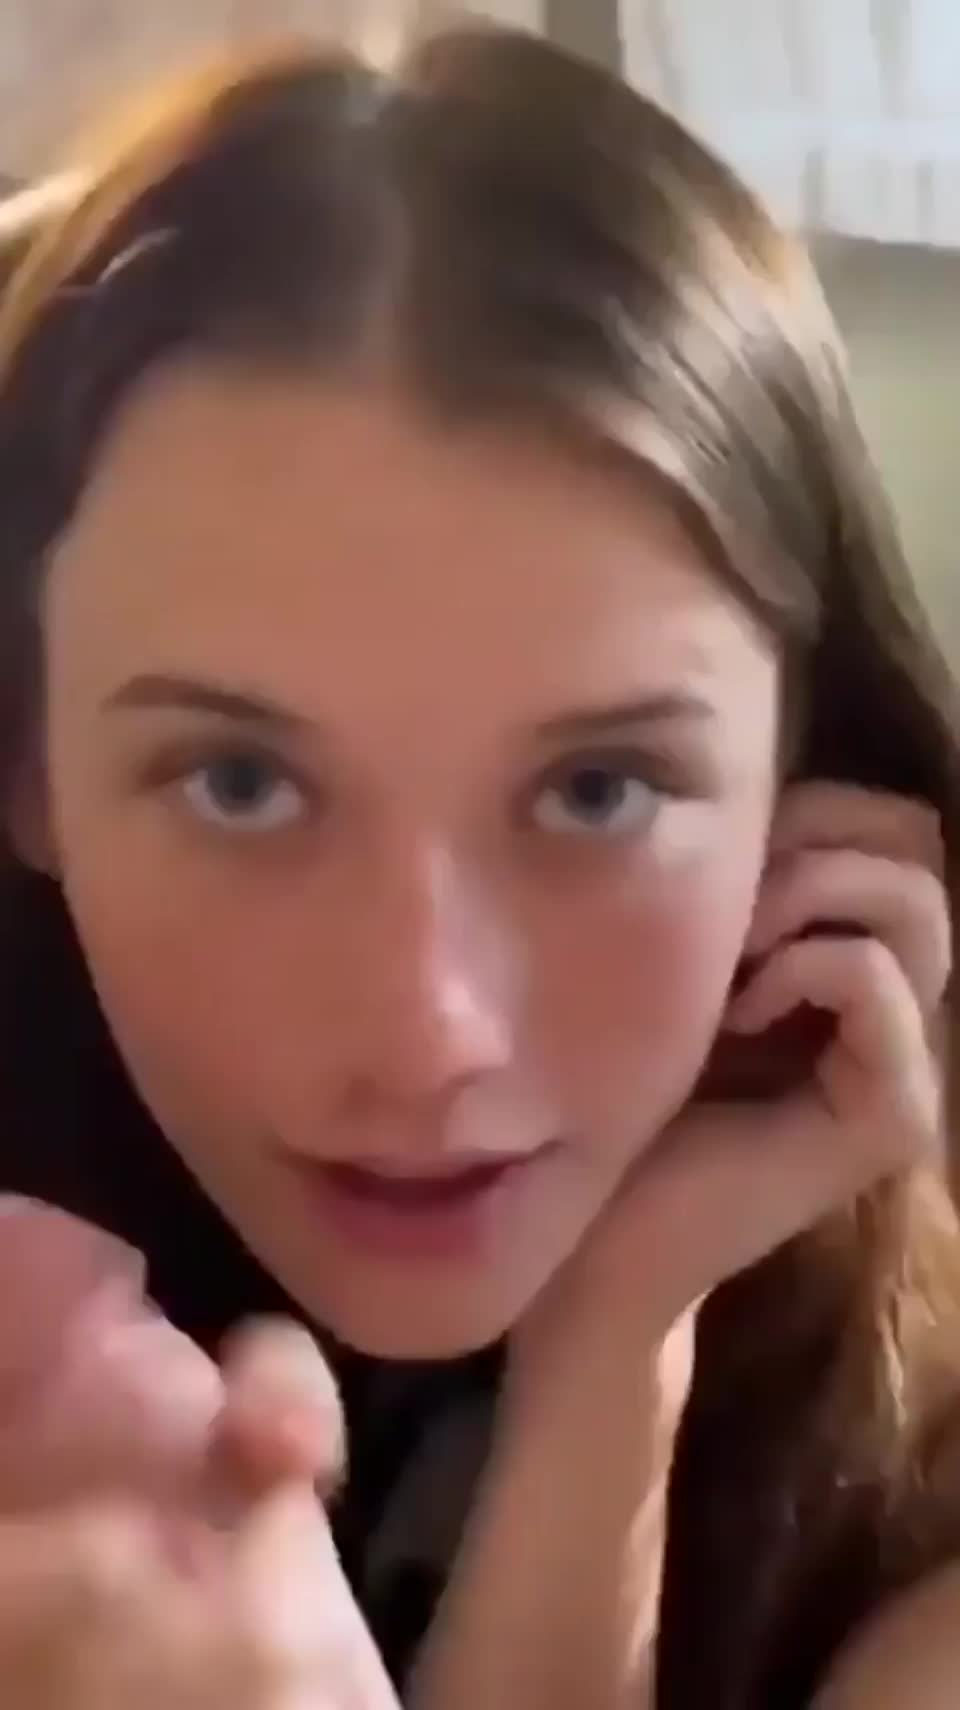 Good finishing in her mouth